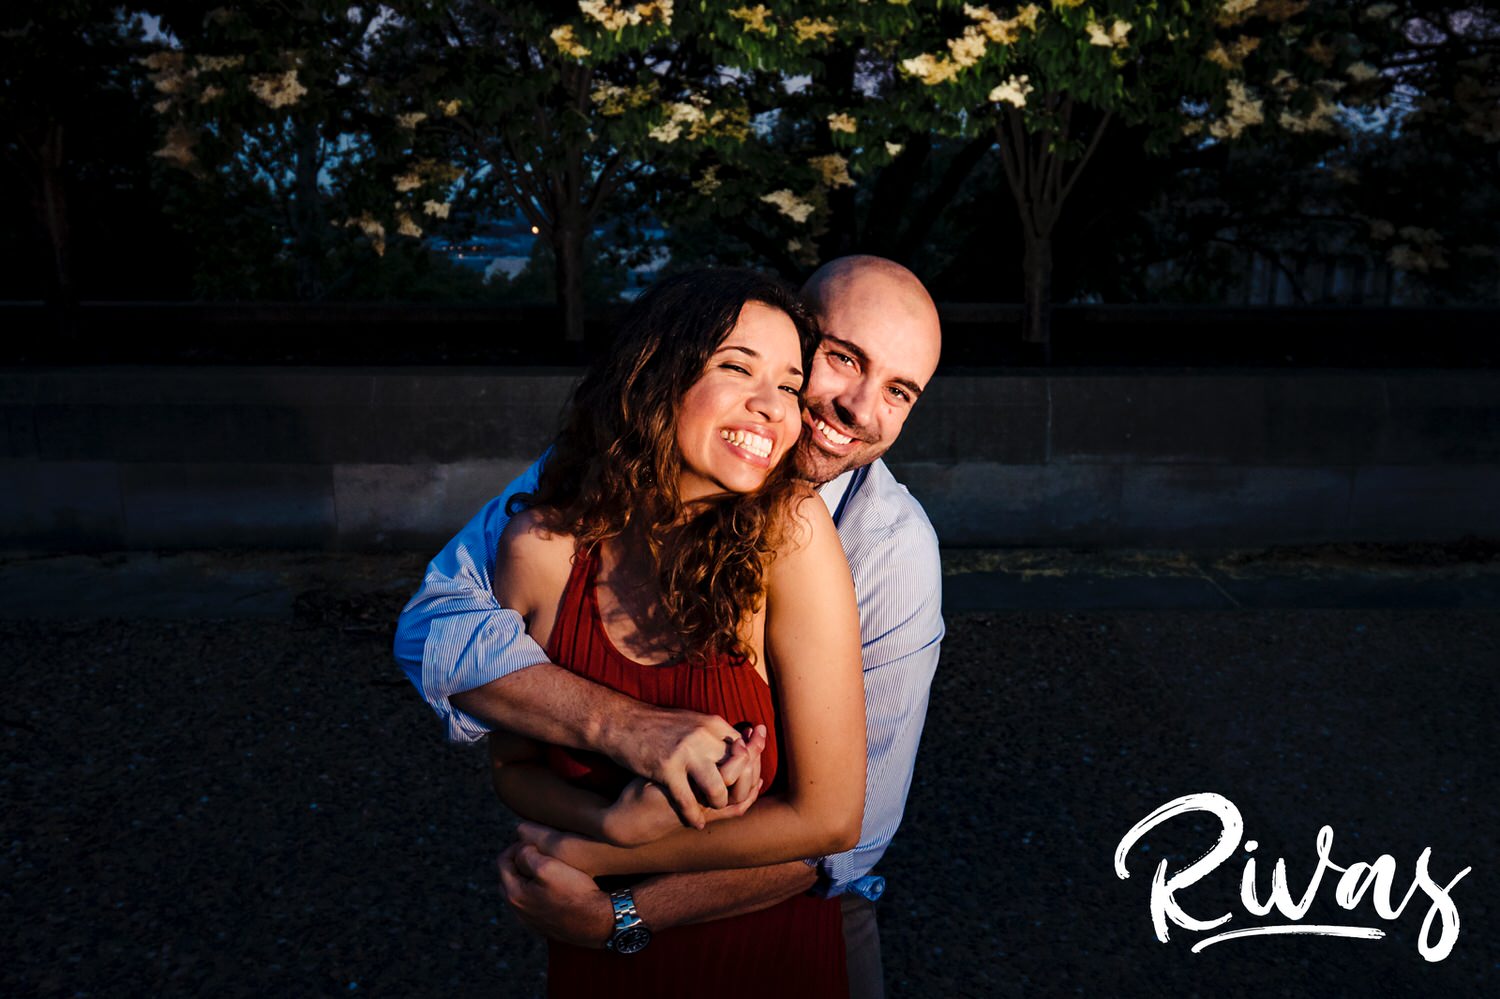 A fun, candid picture of a man holding a woman around the waist as they laugh together during their engagement session at Kansas City's Liberty Memorial. 